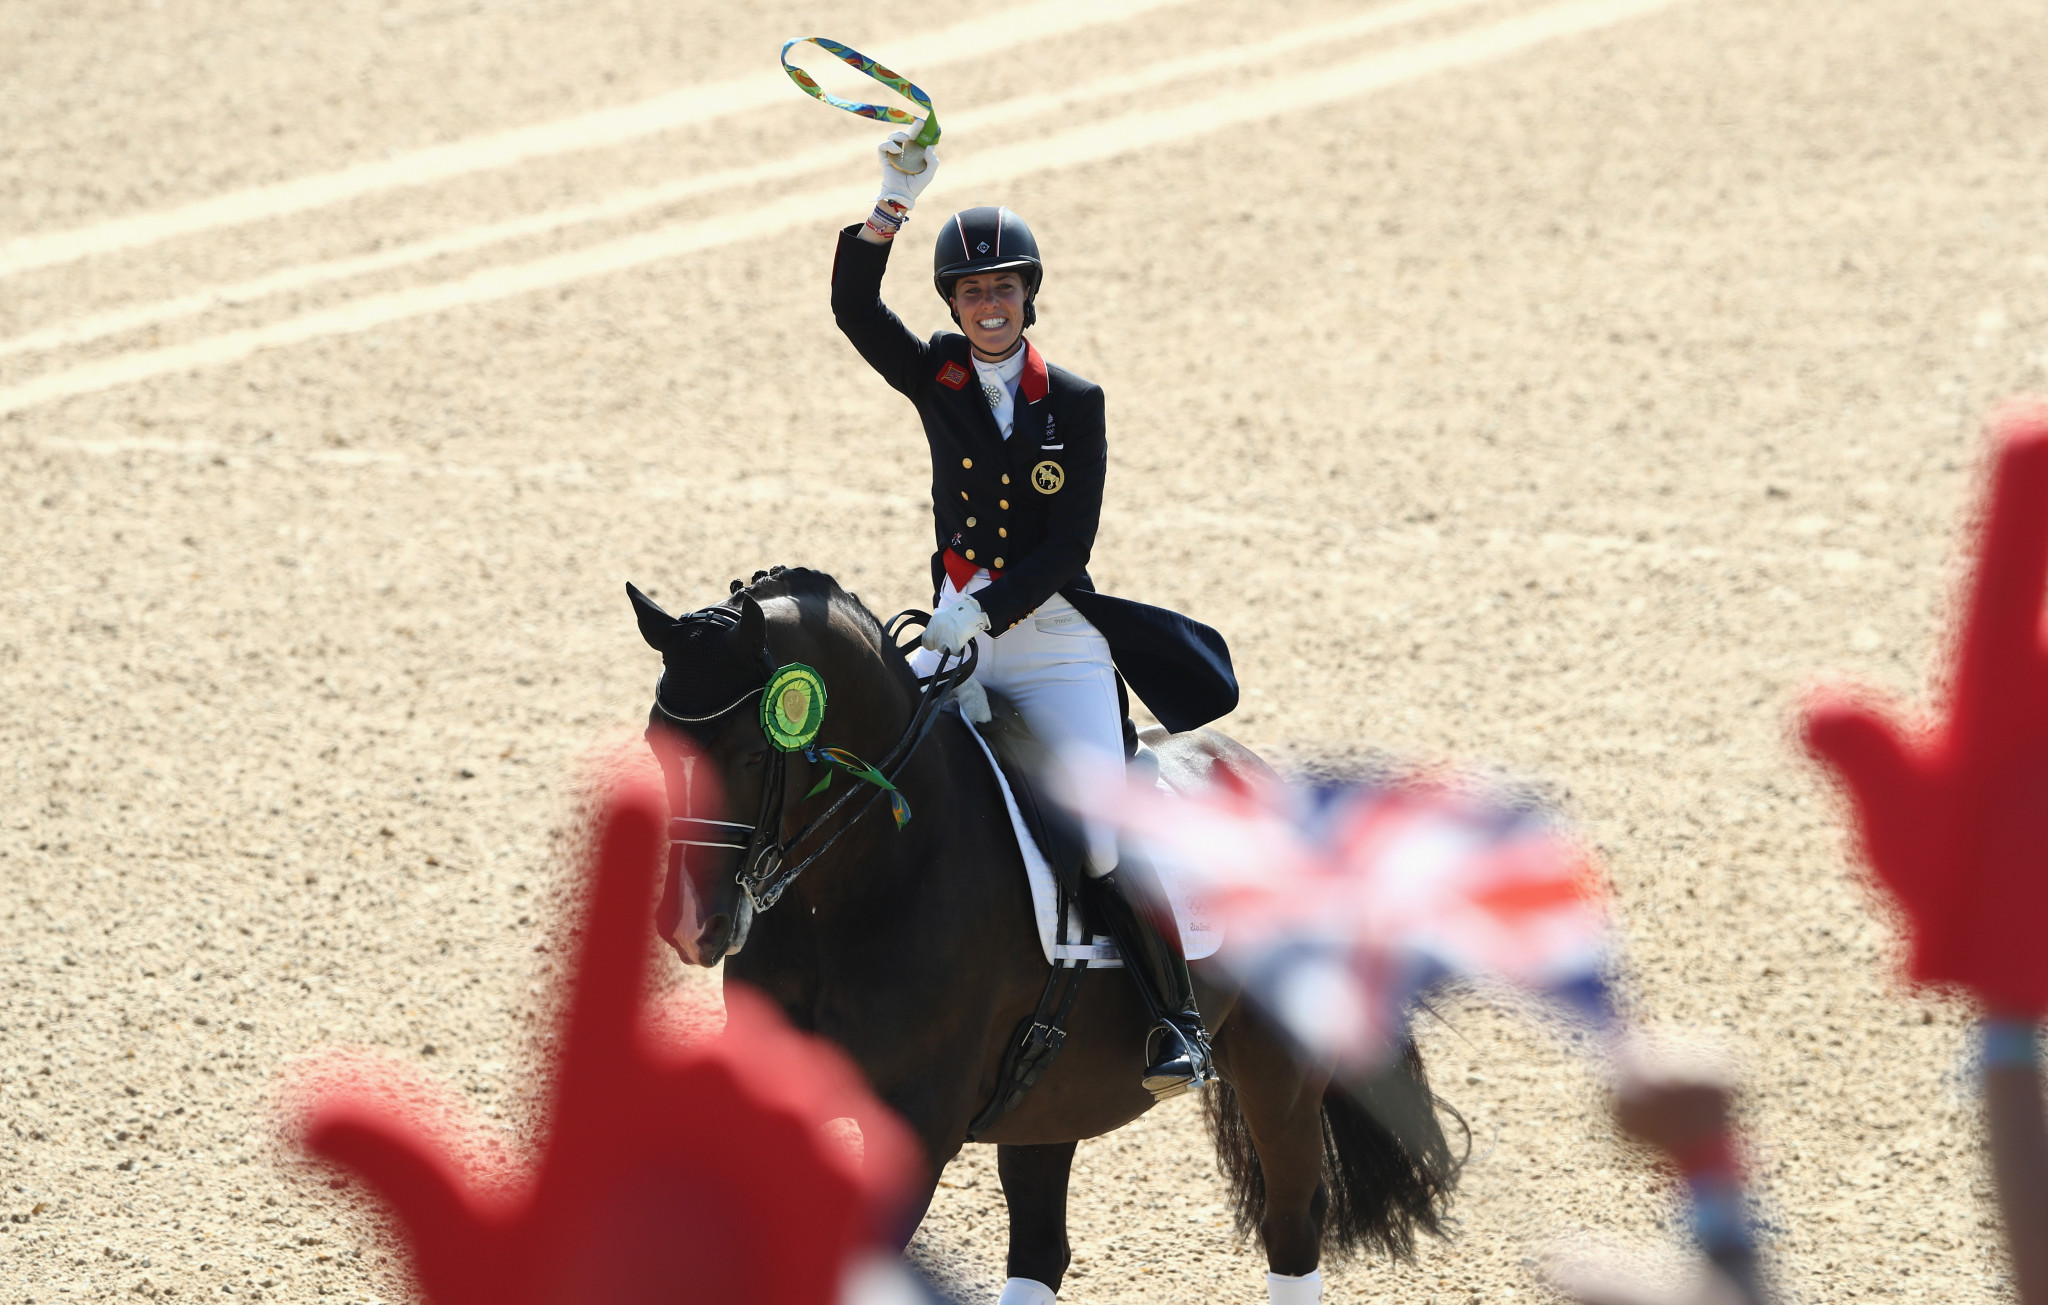 Valegro, the horse Charlotte Dujardin rode to individual dressage gold at Rio 2016, has since retired ©Getty Images